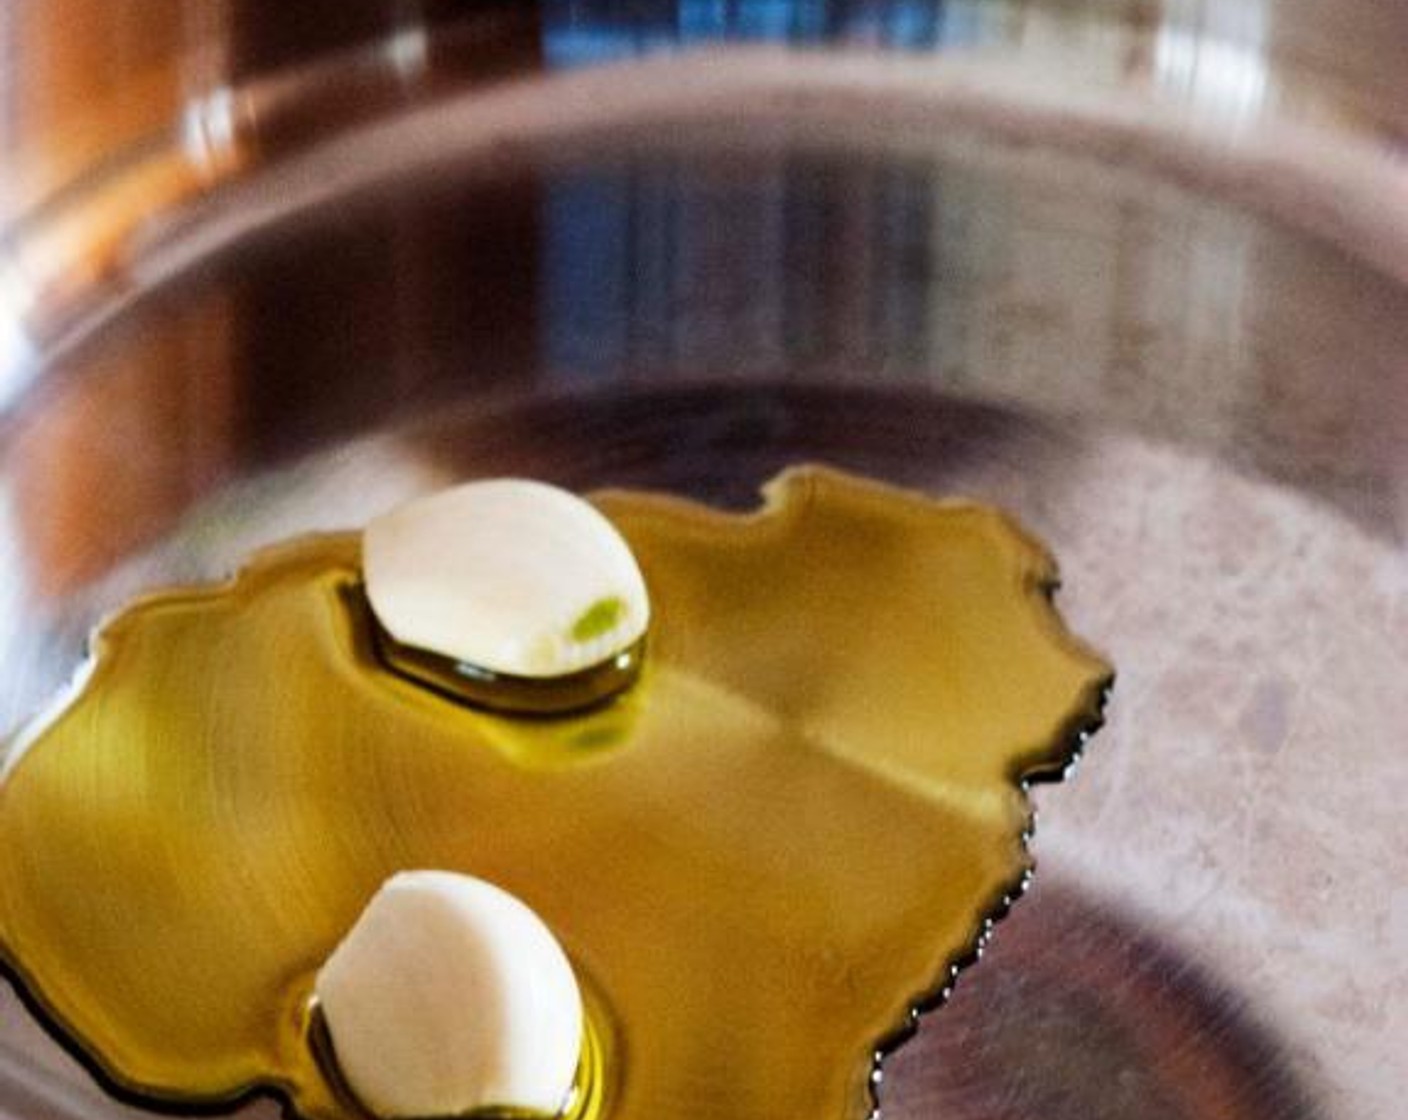 step 2 In an ovenproof skillet, heat up the Extra-Virgin Olive Oil (2 Tbsp) and Garlic (2 cloves) until the cloves turn golden-brown in color. Use low-medium heat, you want to slowly infuse the oil with garlic flavor.